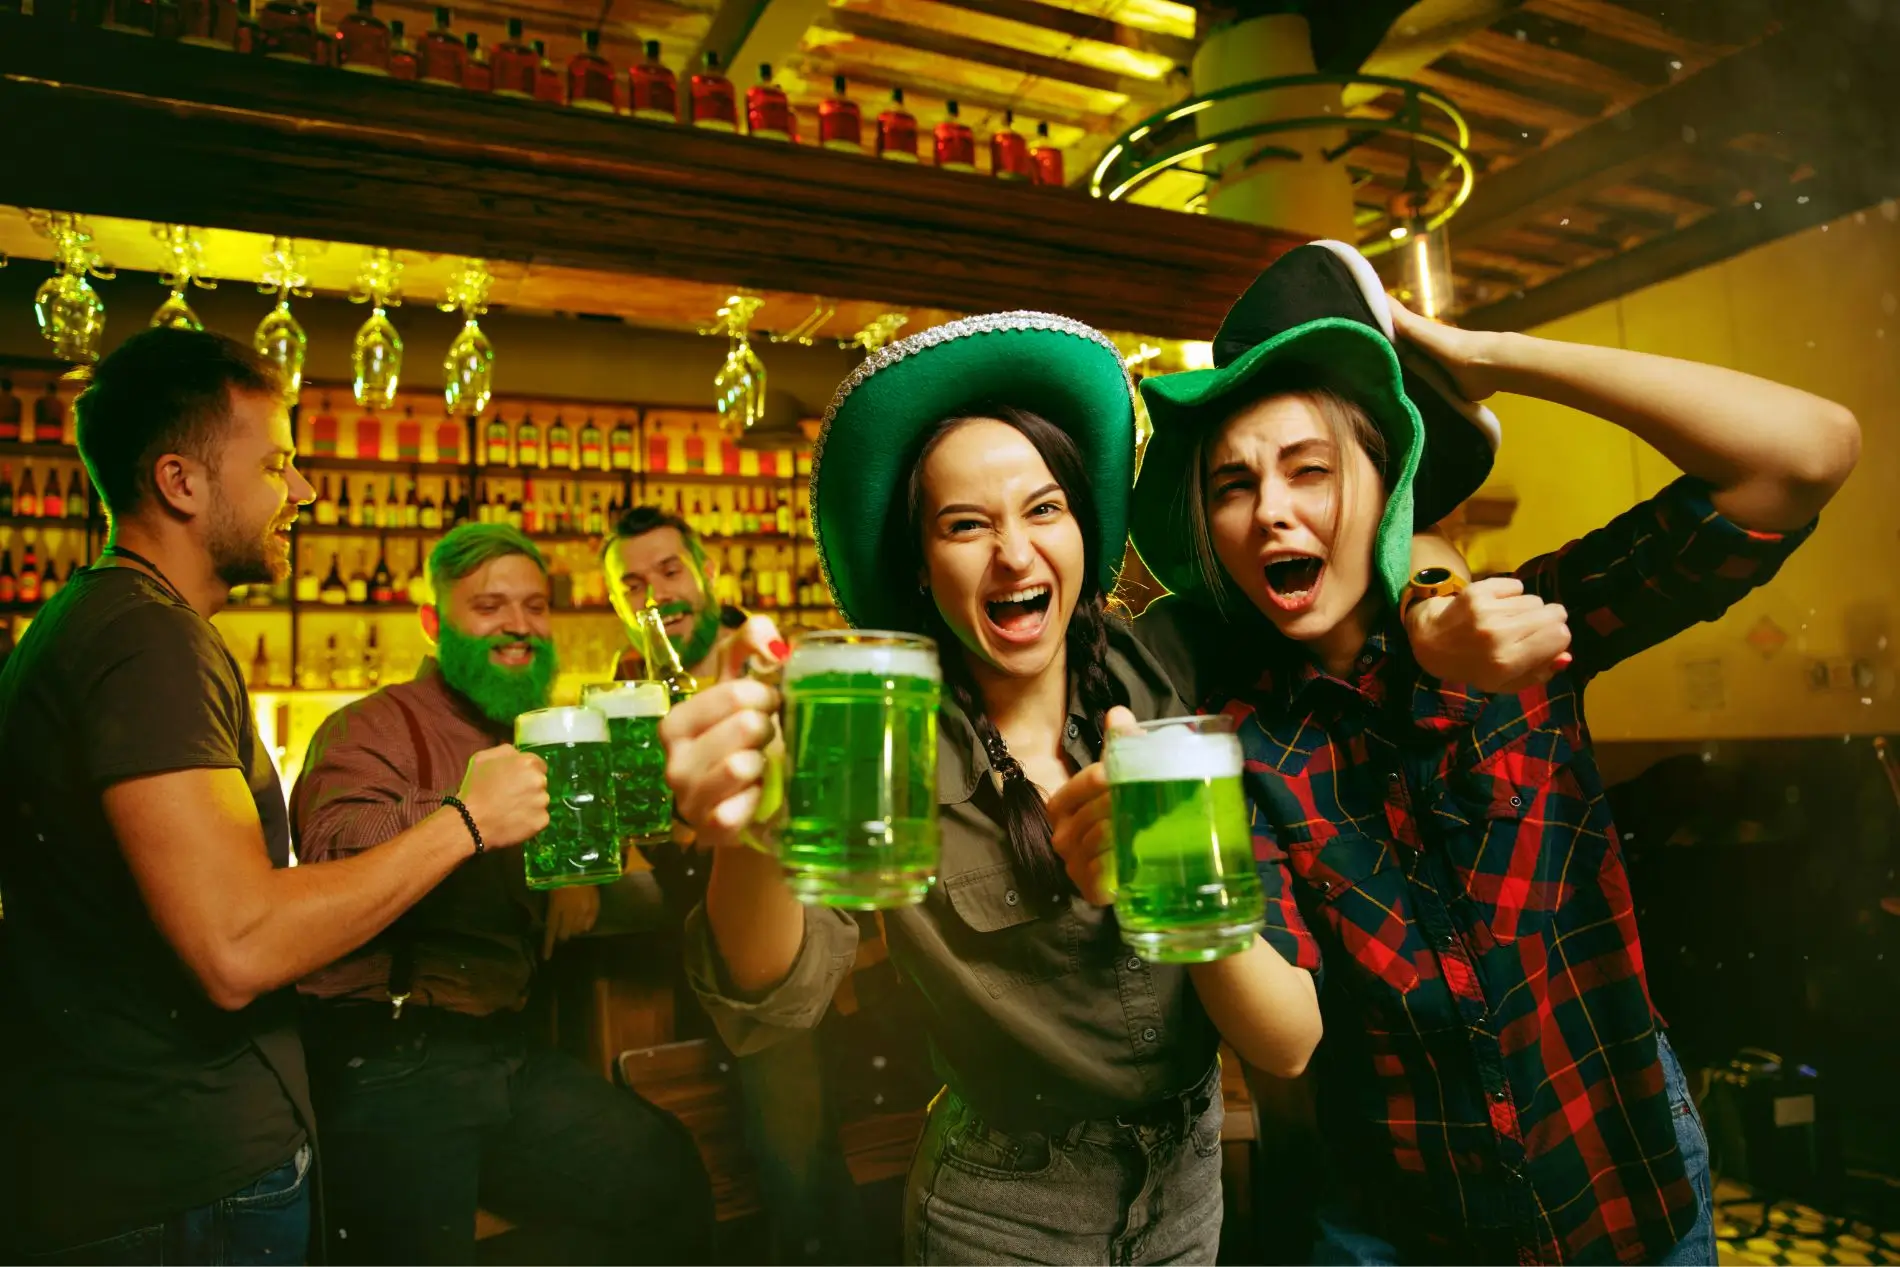 saint-patrick-s-day-party-happy-friends-is-celebrating-drinking-green-beer